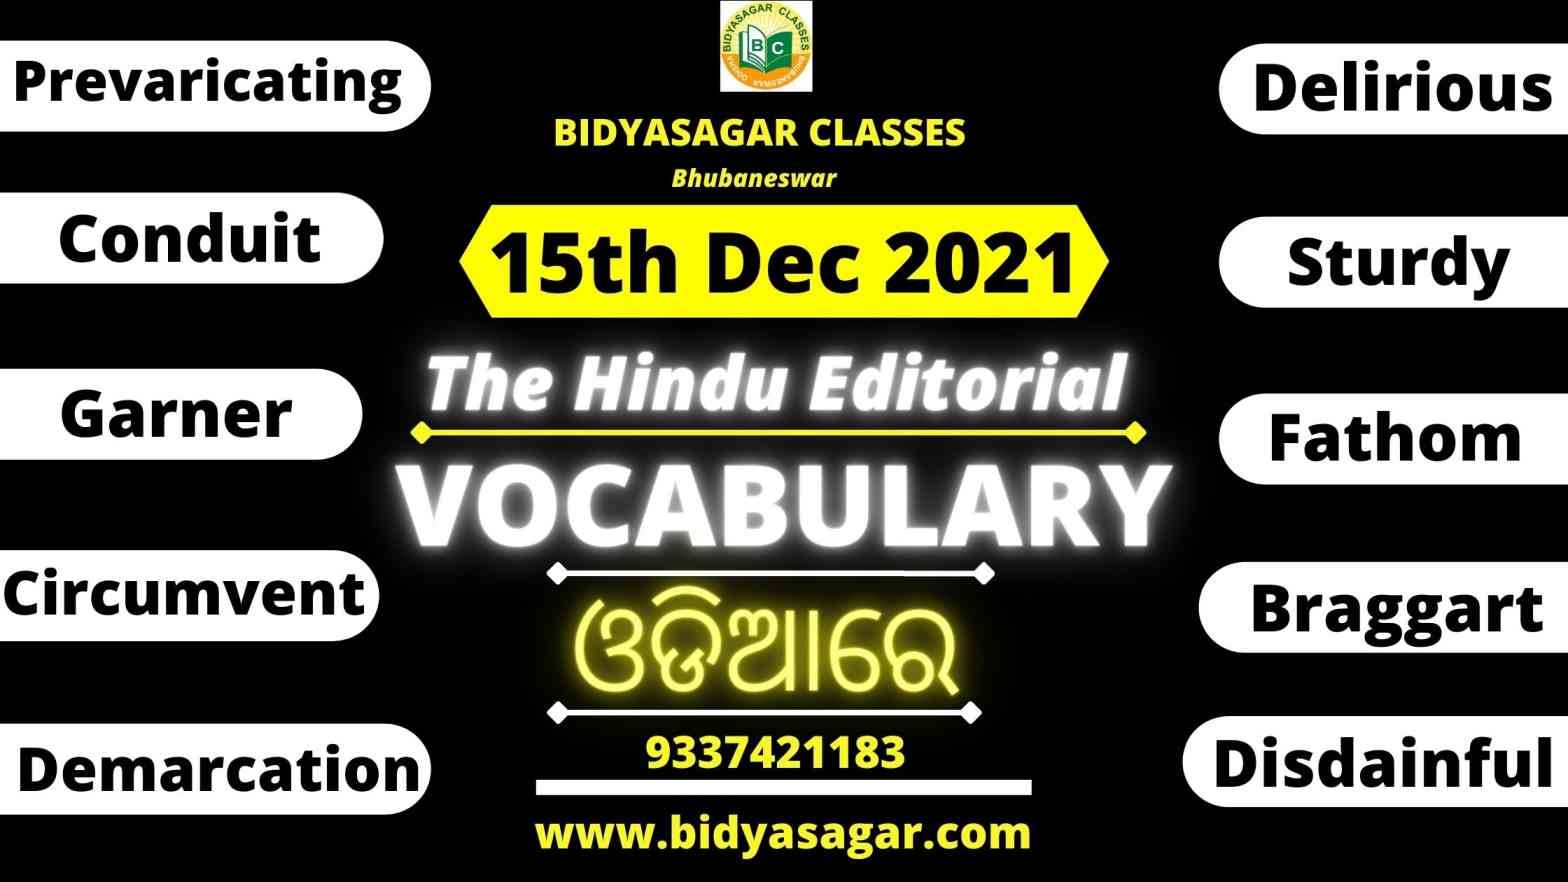 The Hindu Editorial Vocabulary of 15th December 2021